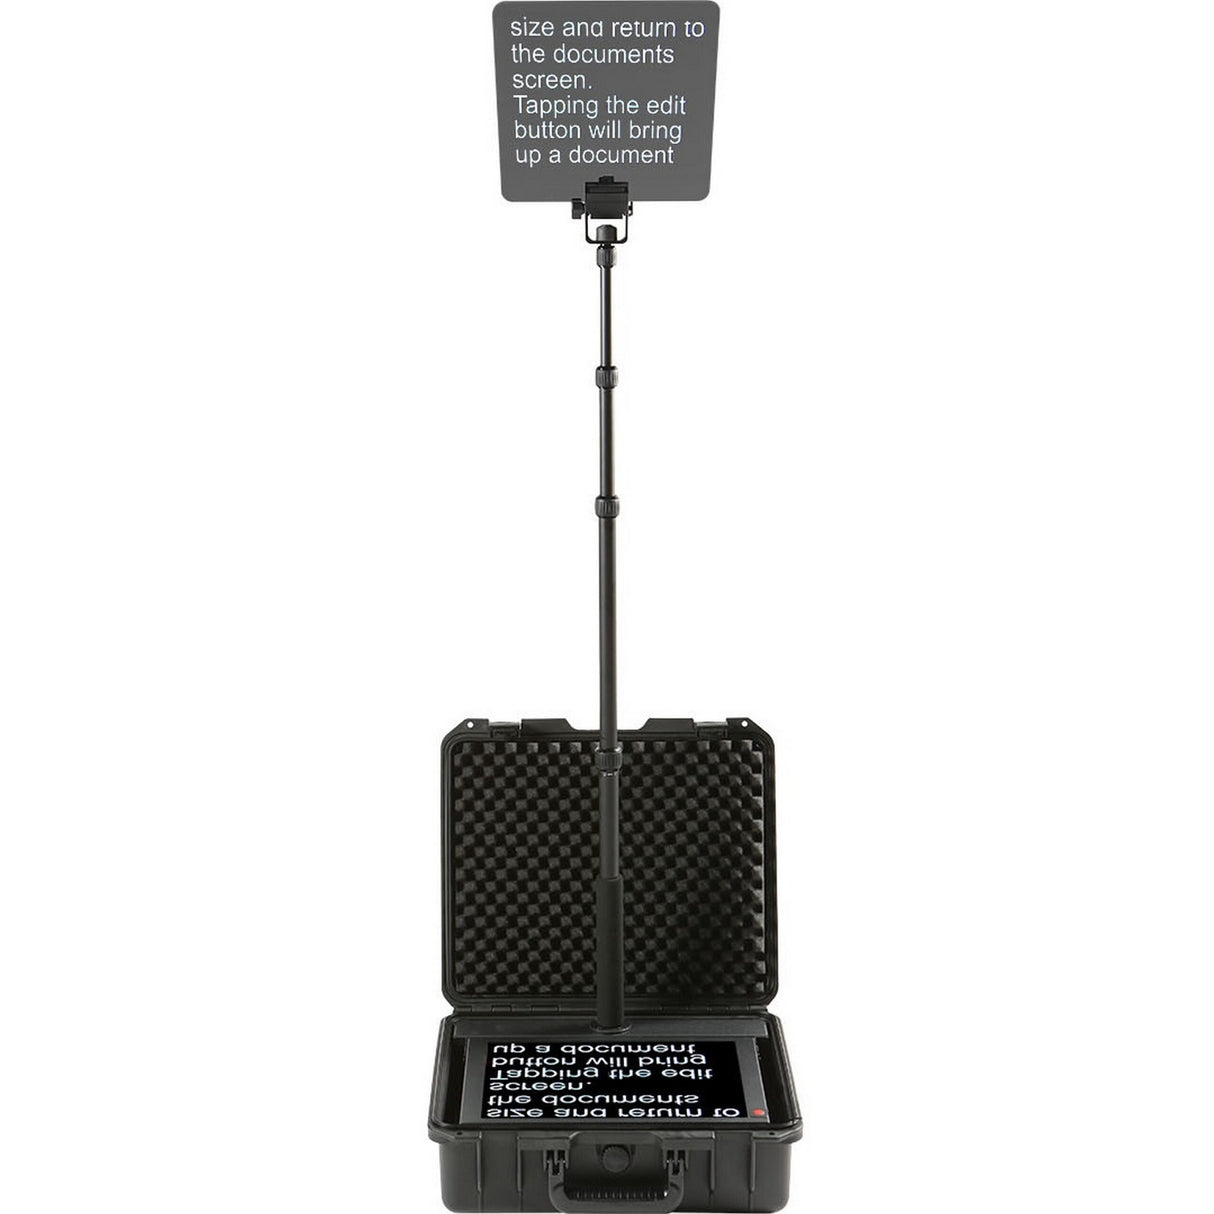 Datavideo TP-800KIT Dual Portable Conference Teleprompter